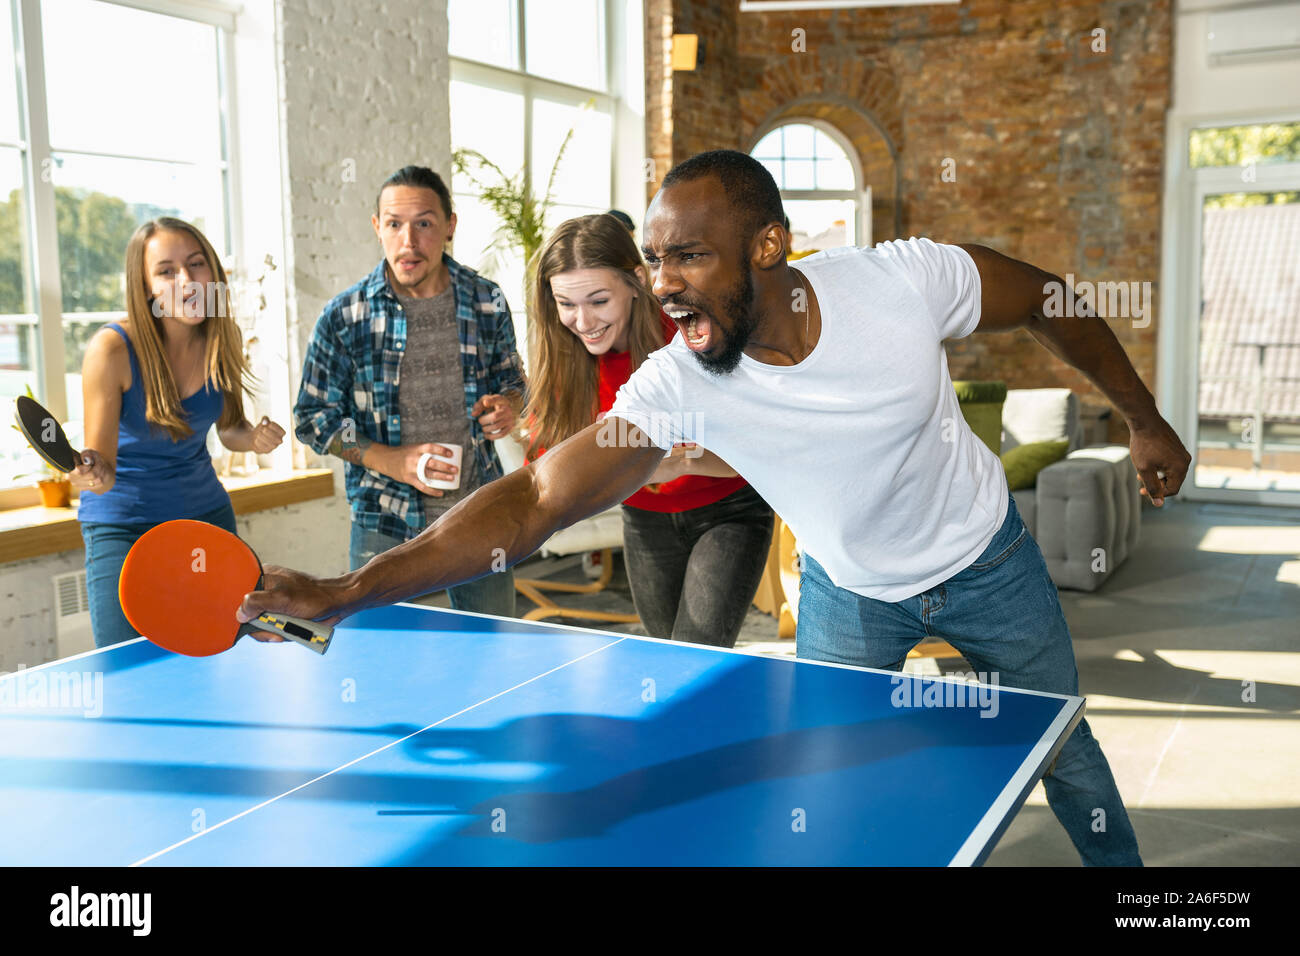 Young people playing table tennis in workplace, having fun. Friends in  casual clothes play ping pong together at sunny day. Concept of leisure  activity, sport, friendship, teambuilding, teamwork Stock Photo - Alamy